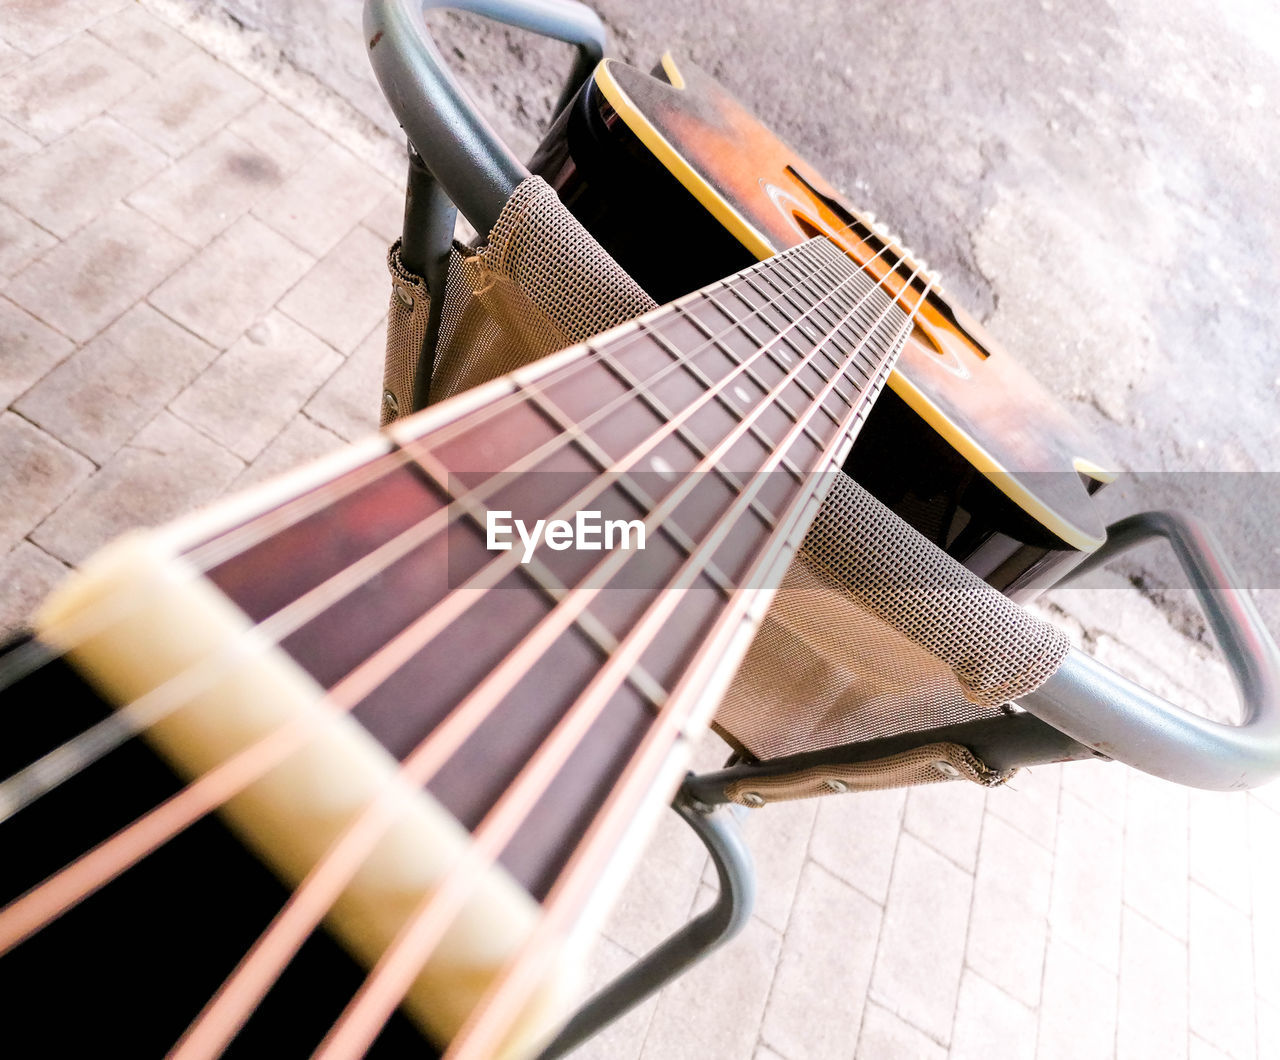 HIGH ANGLE VIEW OF GUITAR ON FLOORING